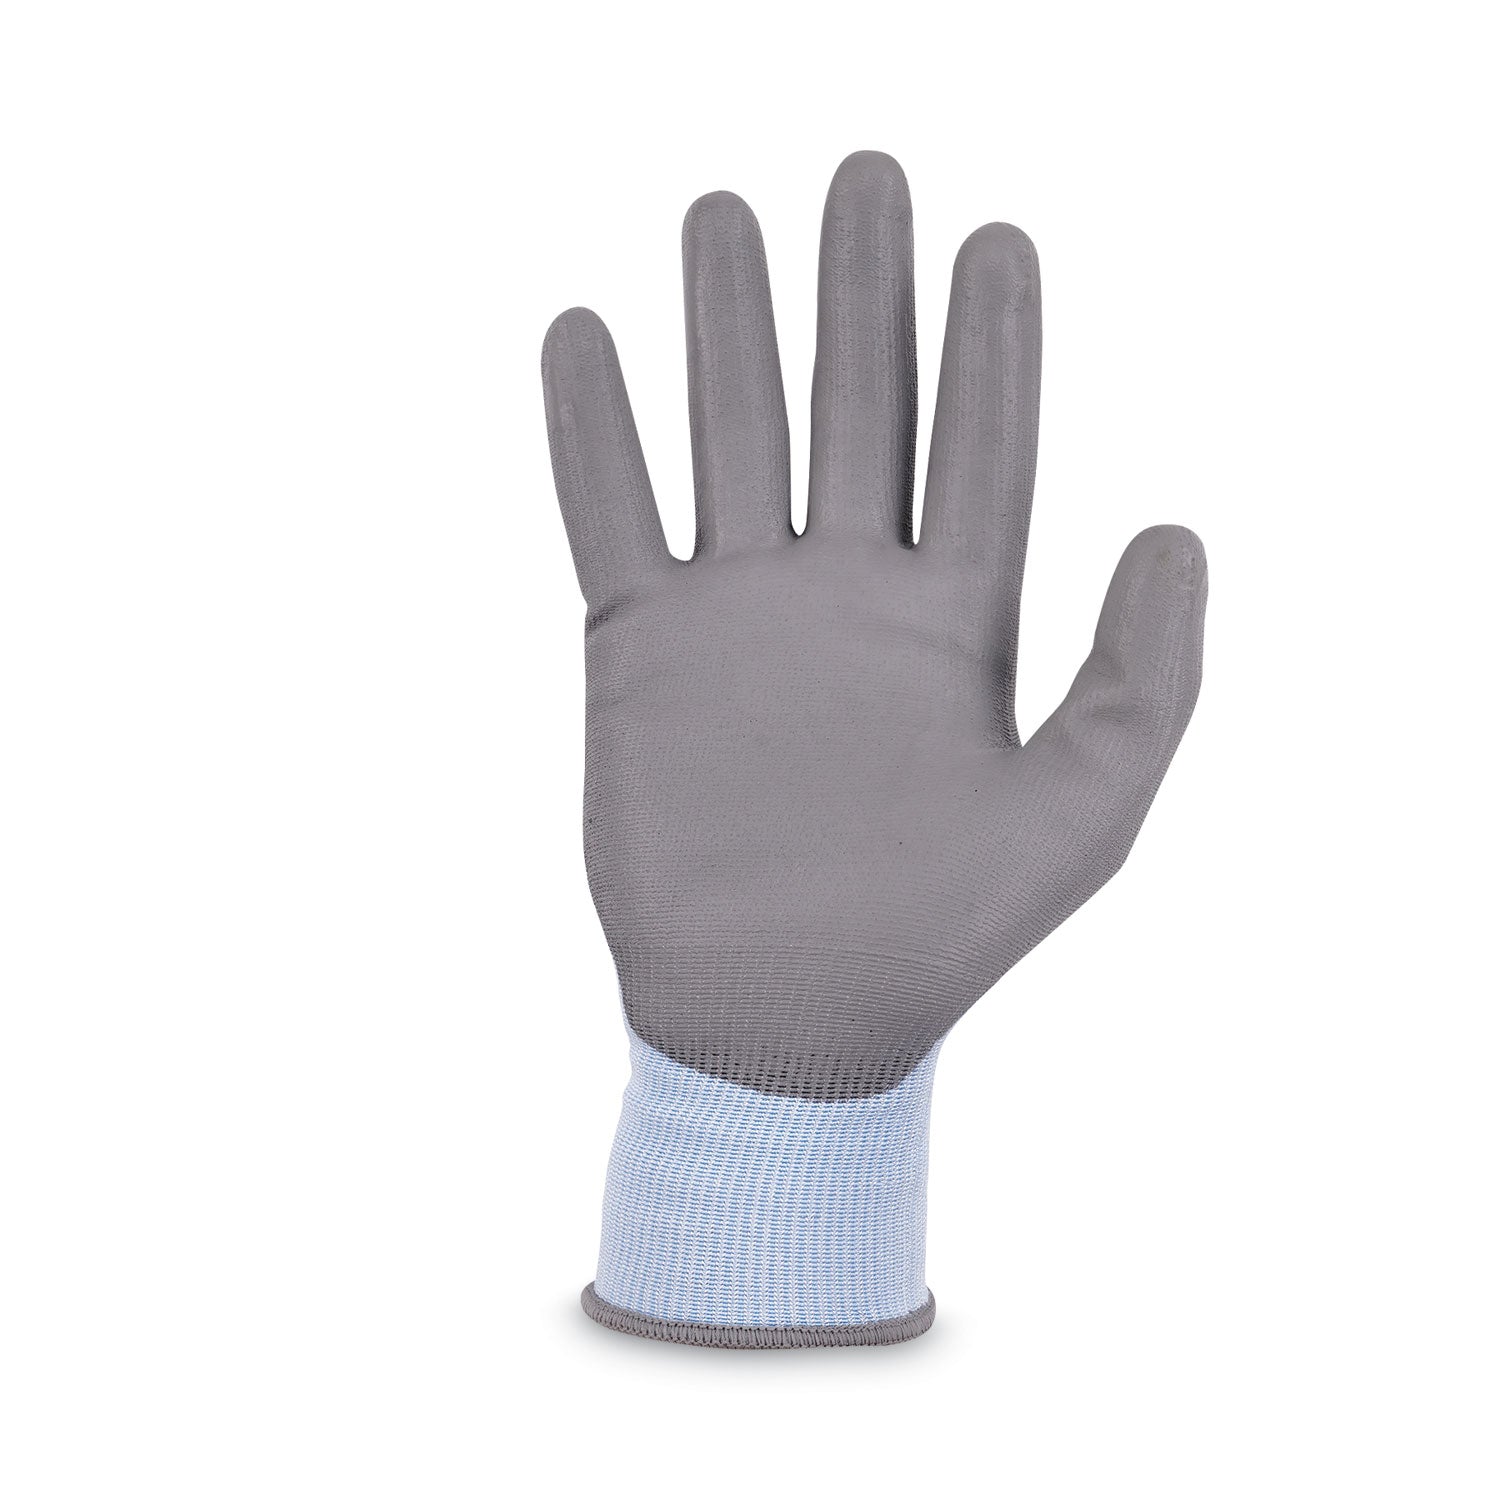 proflex-7025-ansi-a2-pu-coated-cr-gloves-blue-2x-large-pair-ships-in-1-3-business-days_ego10436 - 2